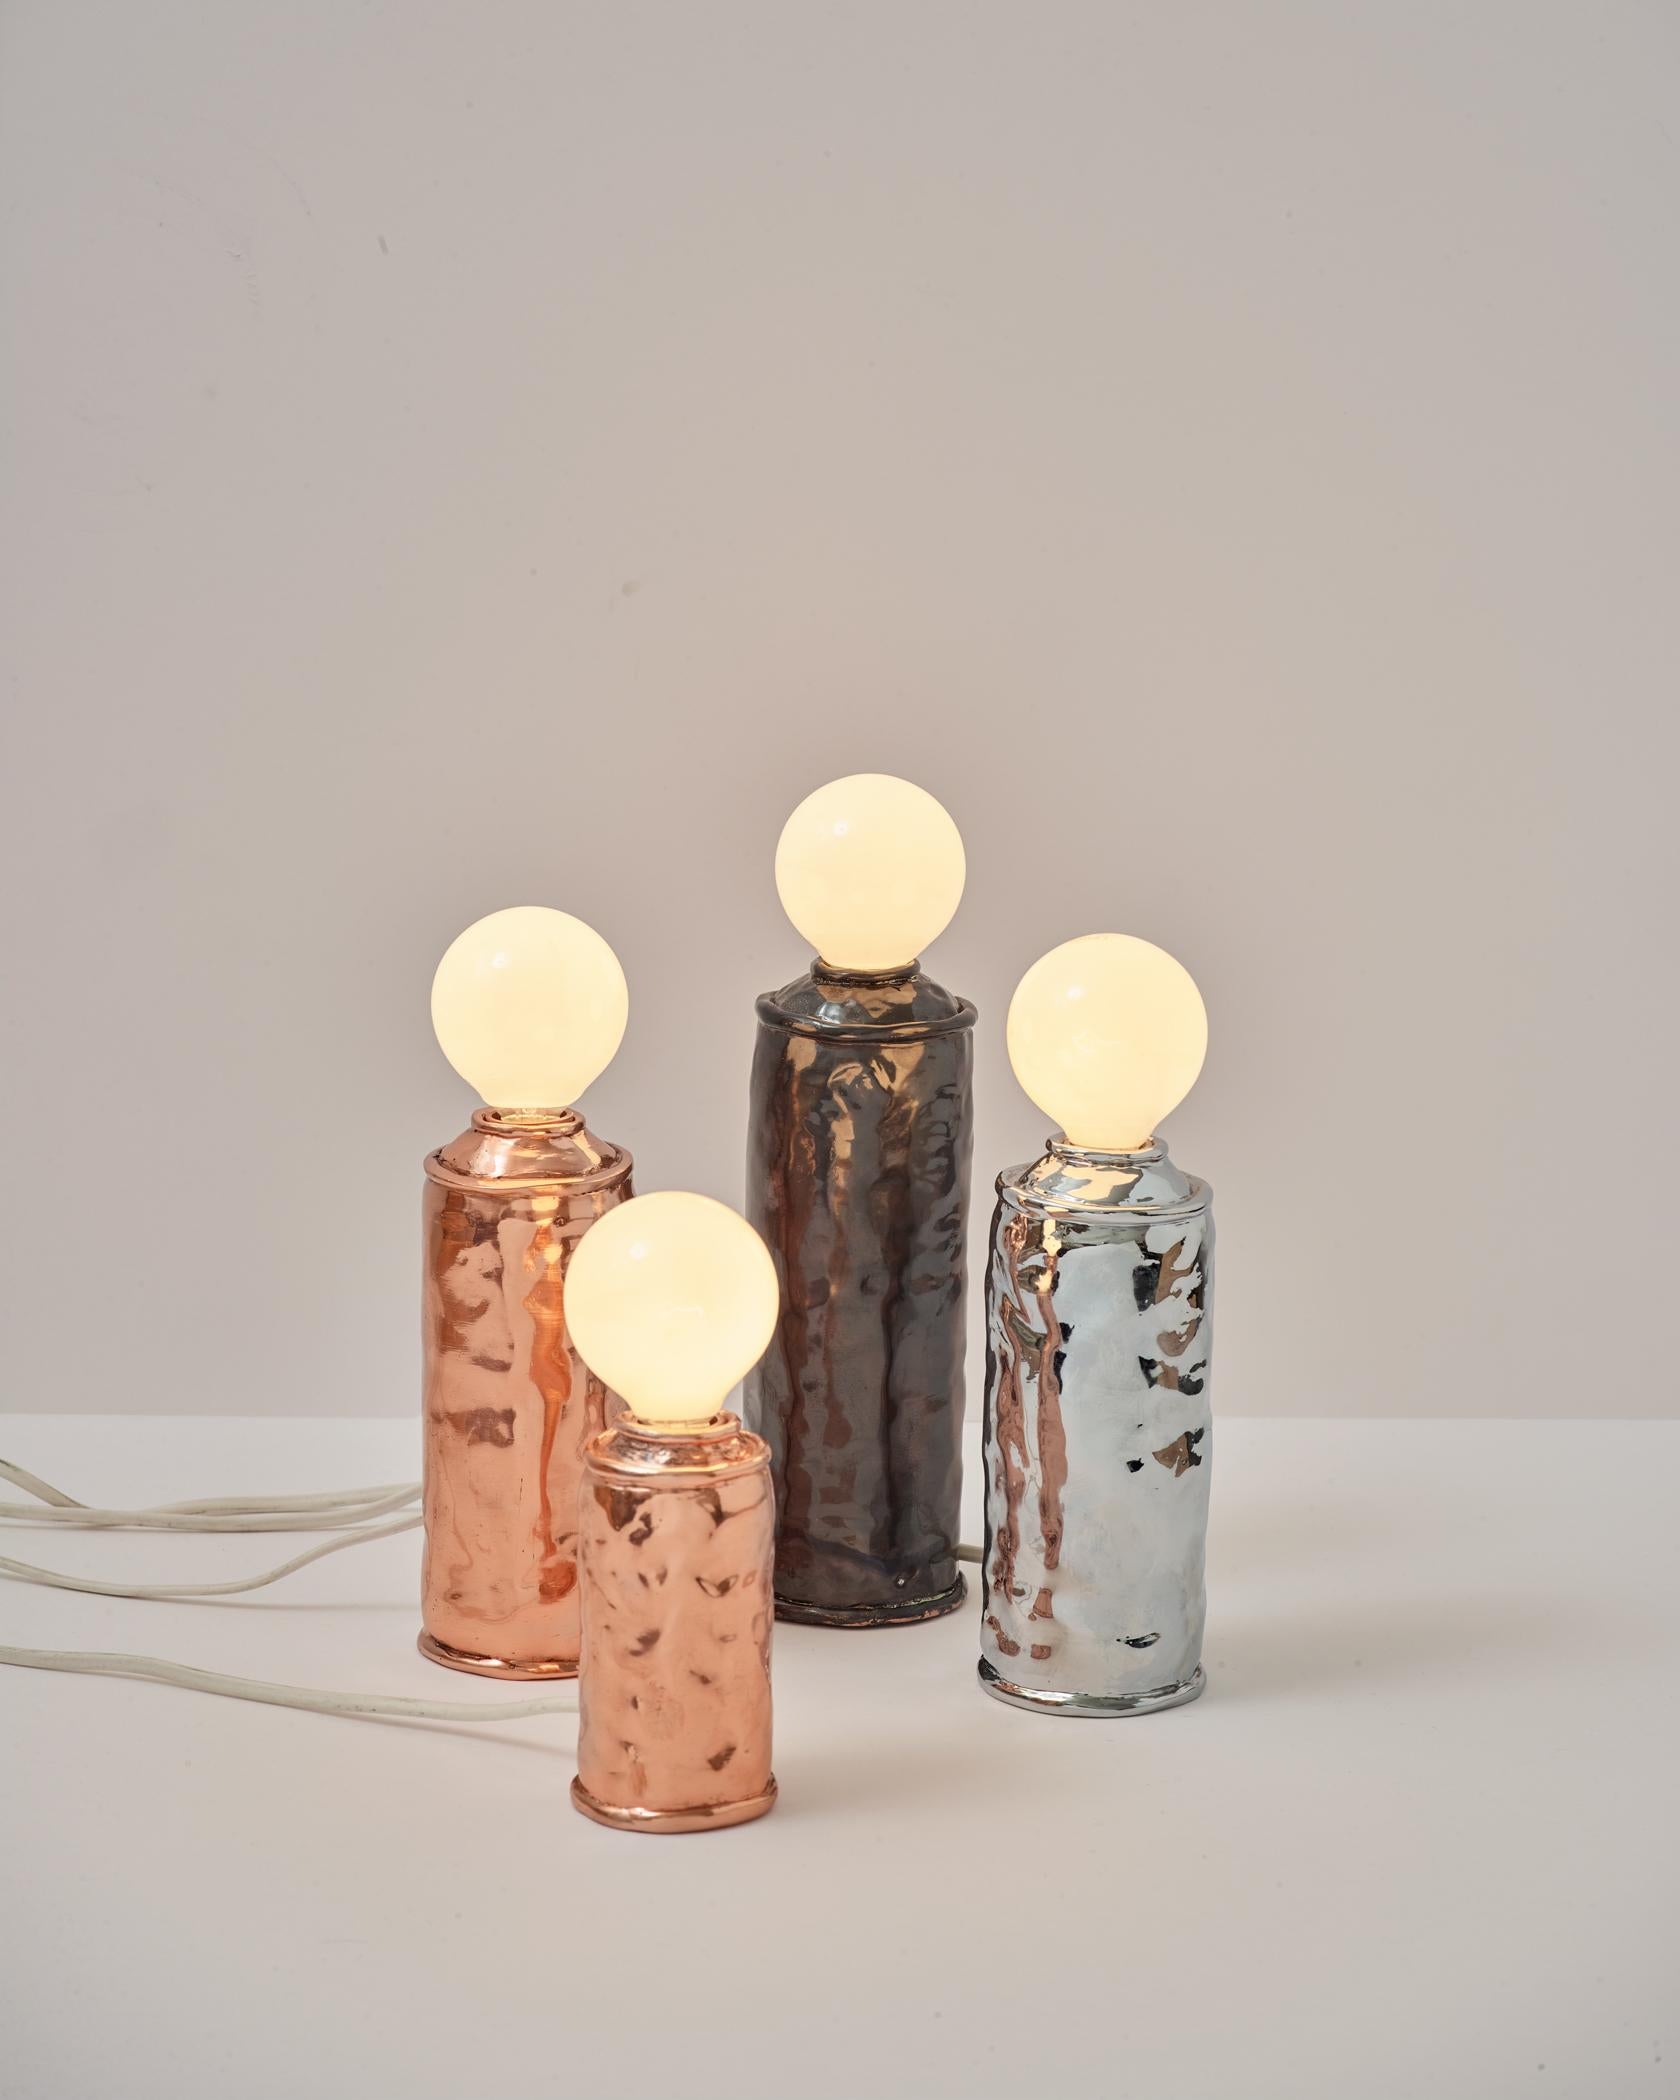 Niccoló Spirito
Table lamp 
Bombolamp lighting collection

Each piece is accompanied by a Certificate of Authenticity signed by the author.

BOMBOLAMP is a series of table lamps made using exact copies of different types of spray paint cans.